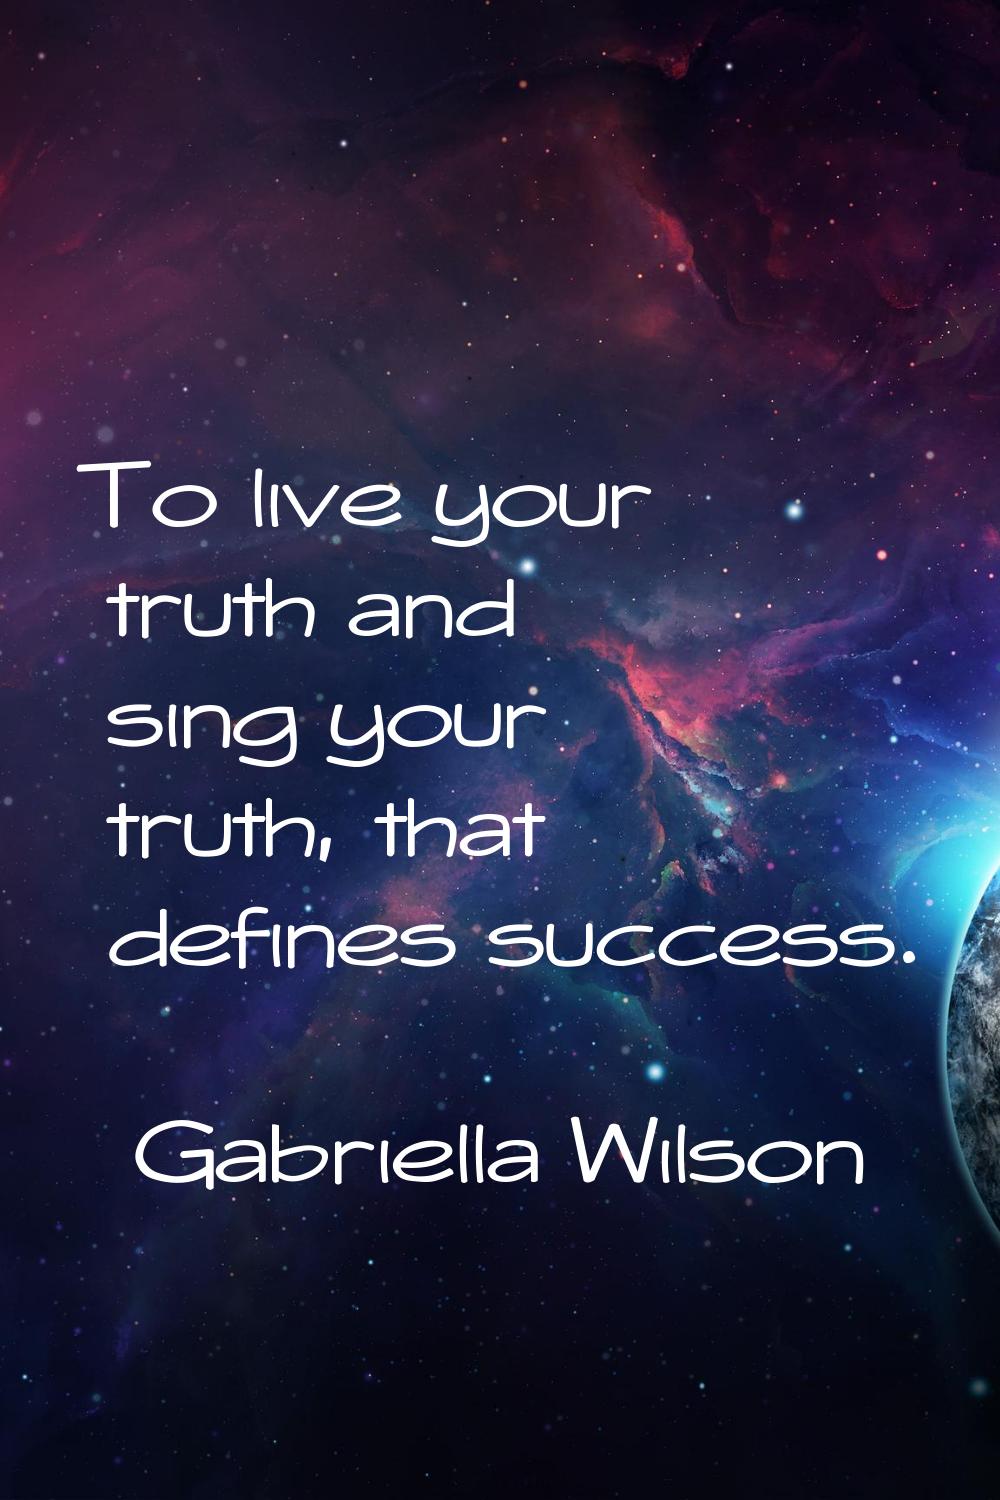 To live your truth and sing your truth, that defines success.